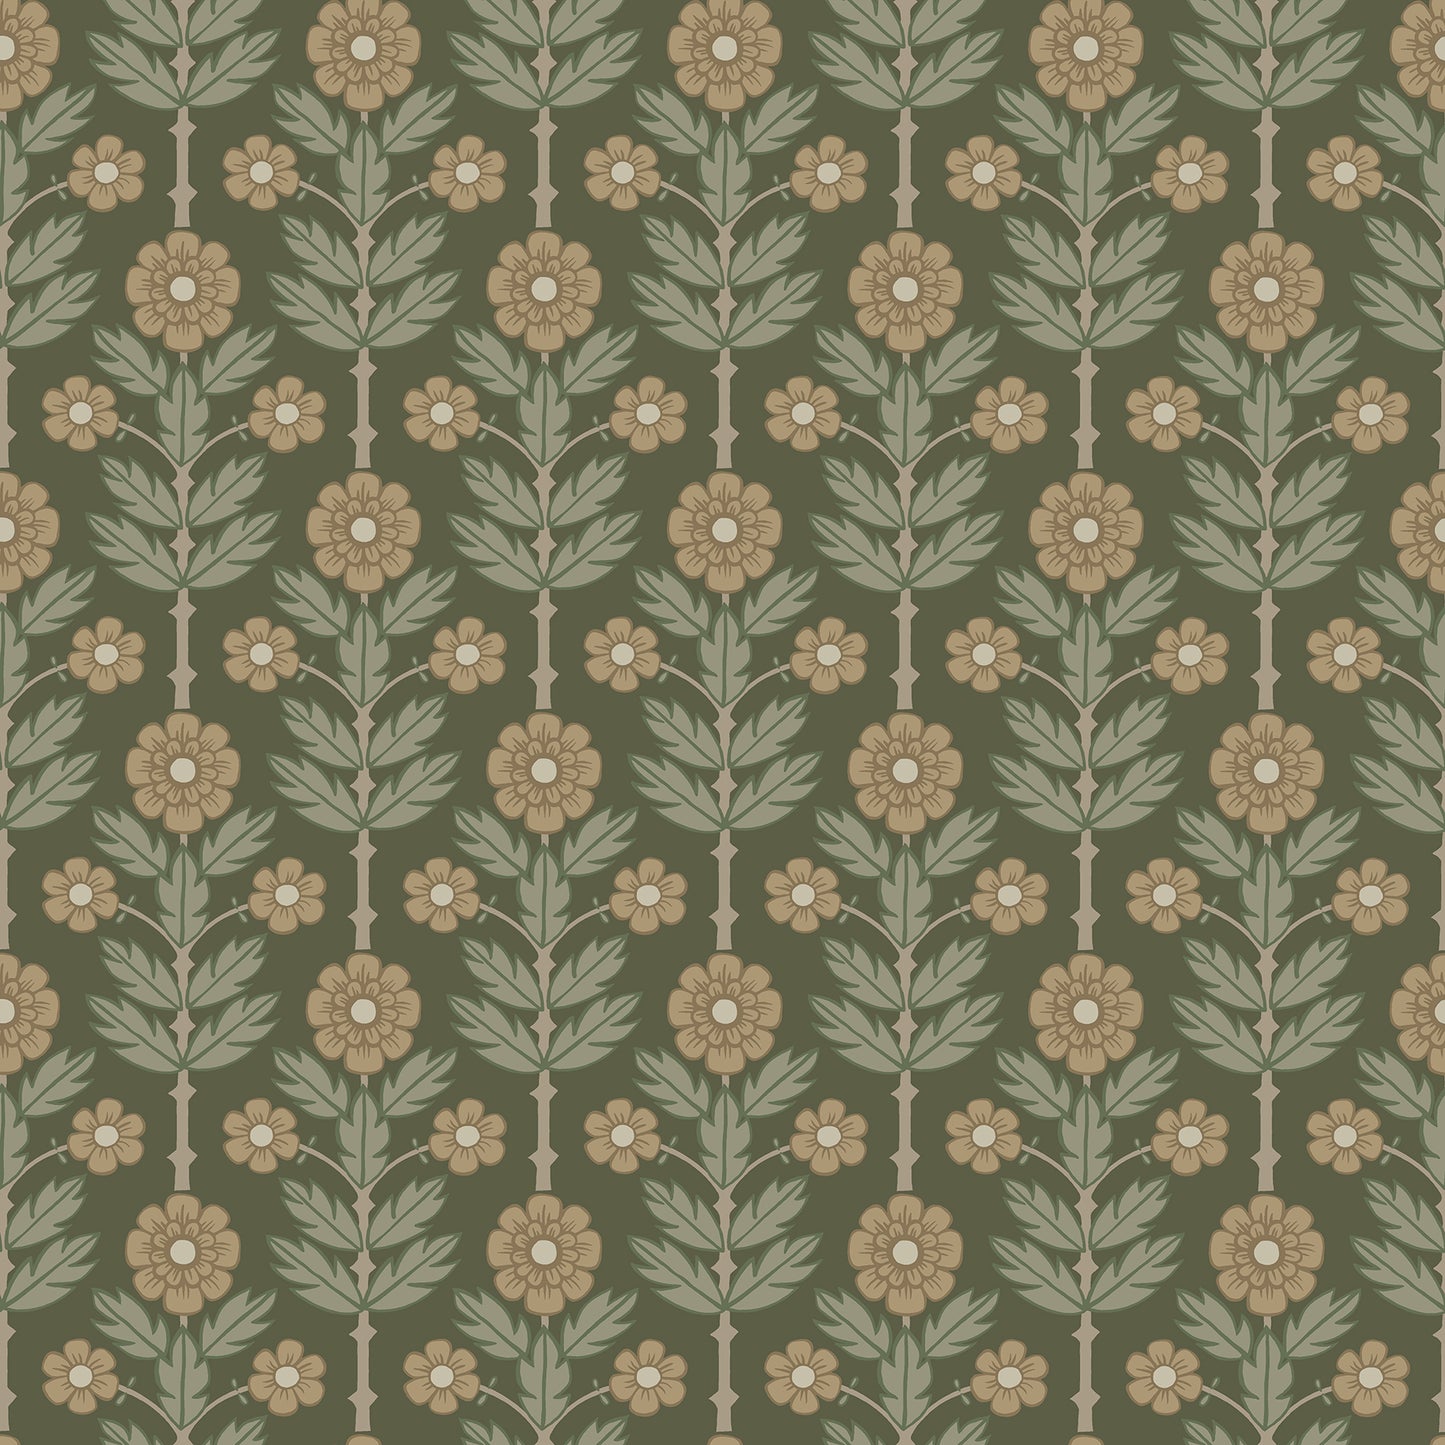 Looking for 2948-28009 Spring Aya Green Floral Green A-Street Prints Wallpaper